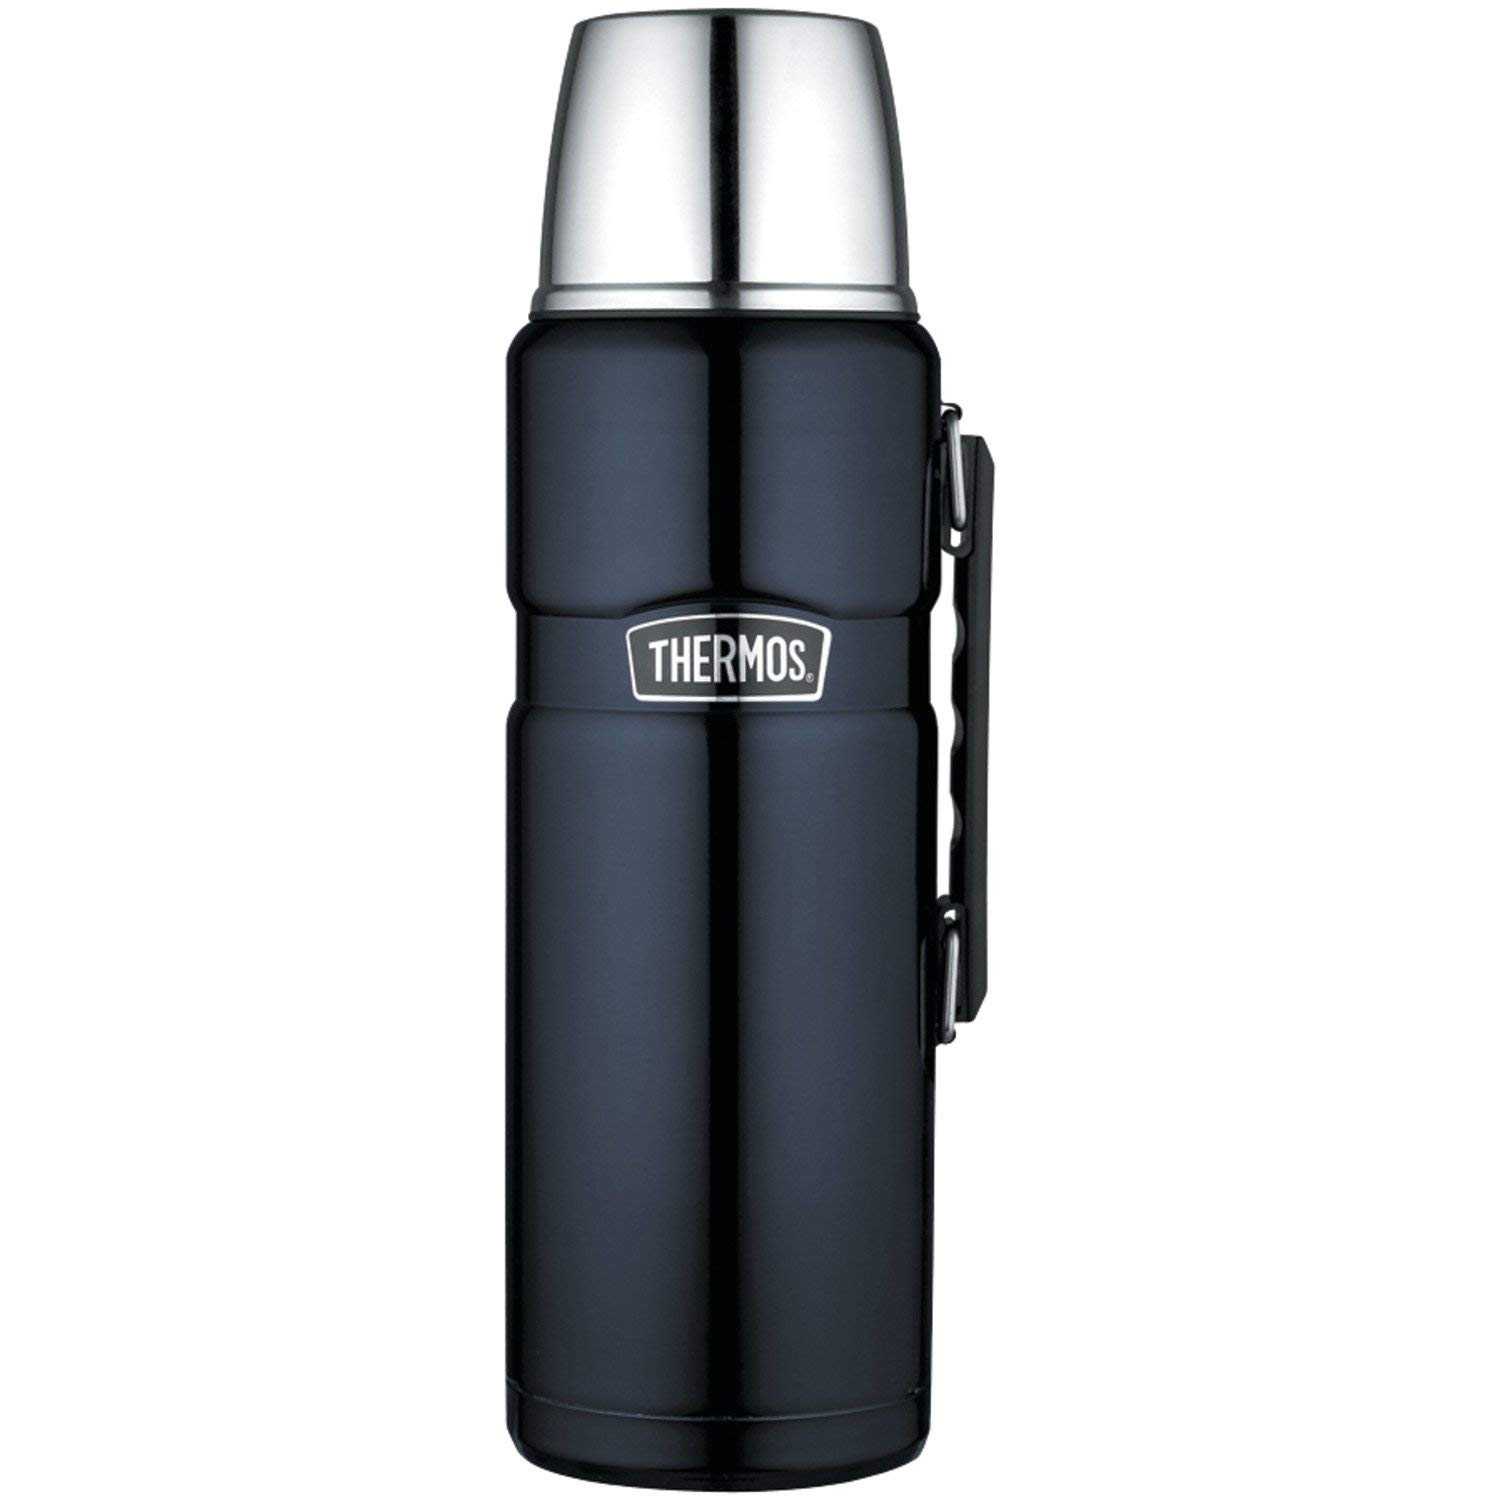 Thermos Stainless King 68 Ounce Vacuum Insulated Beverage Bottle